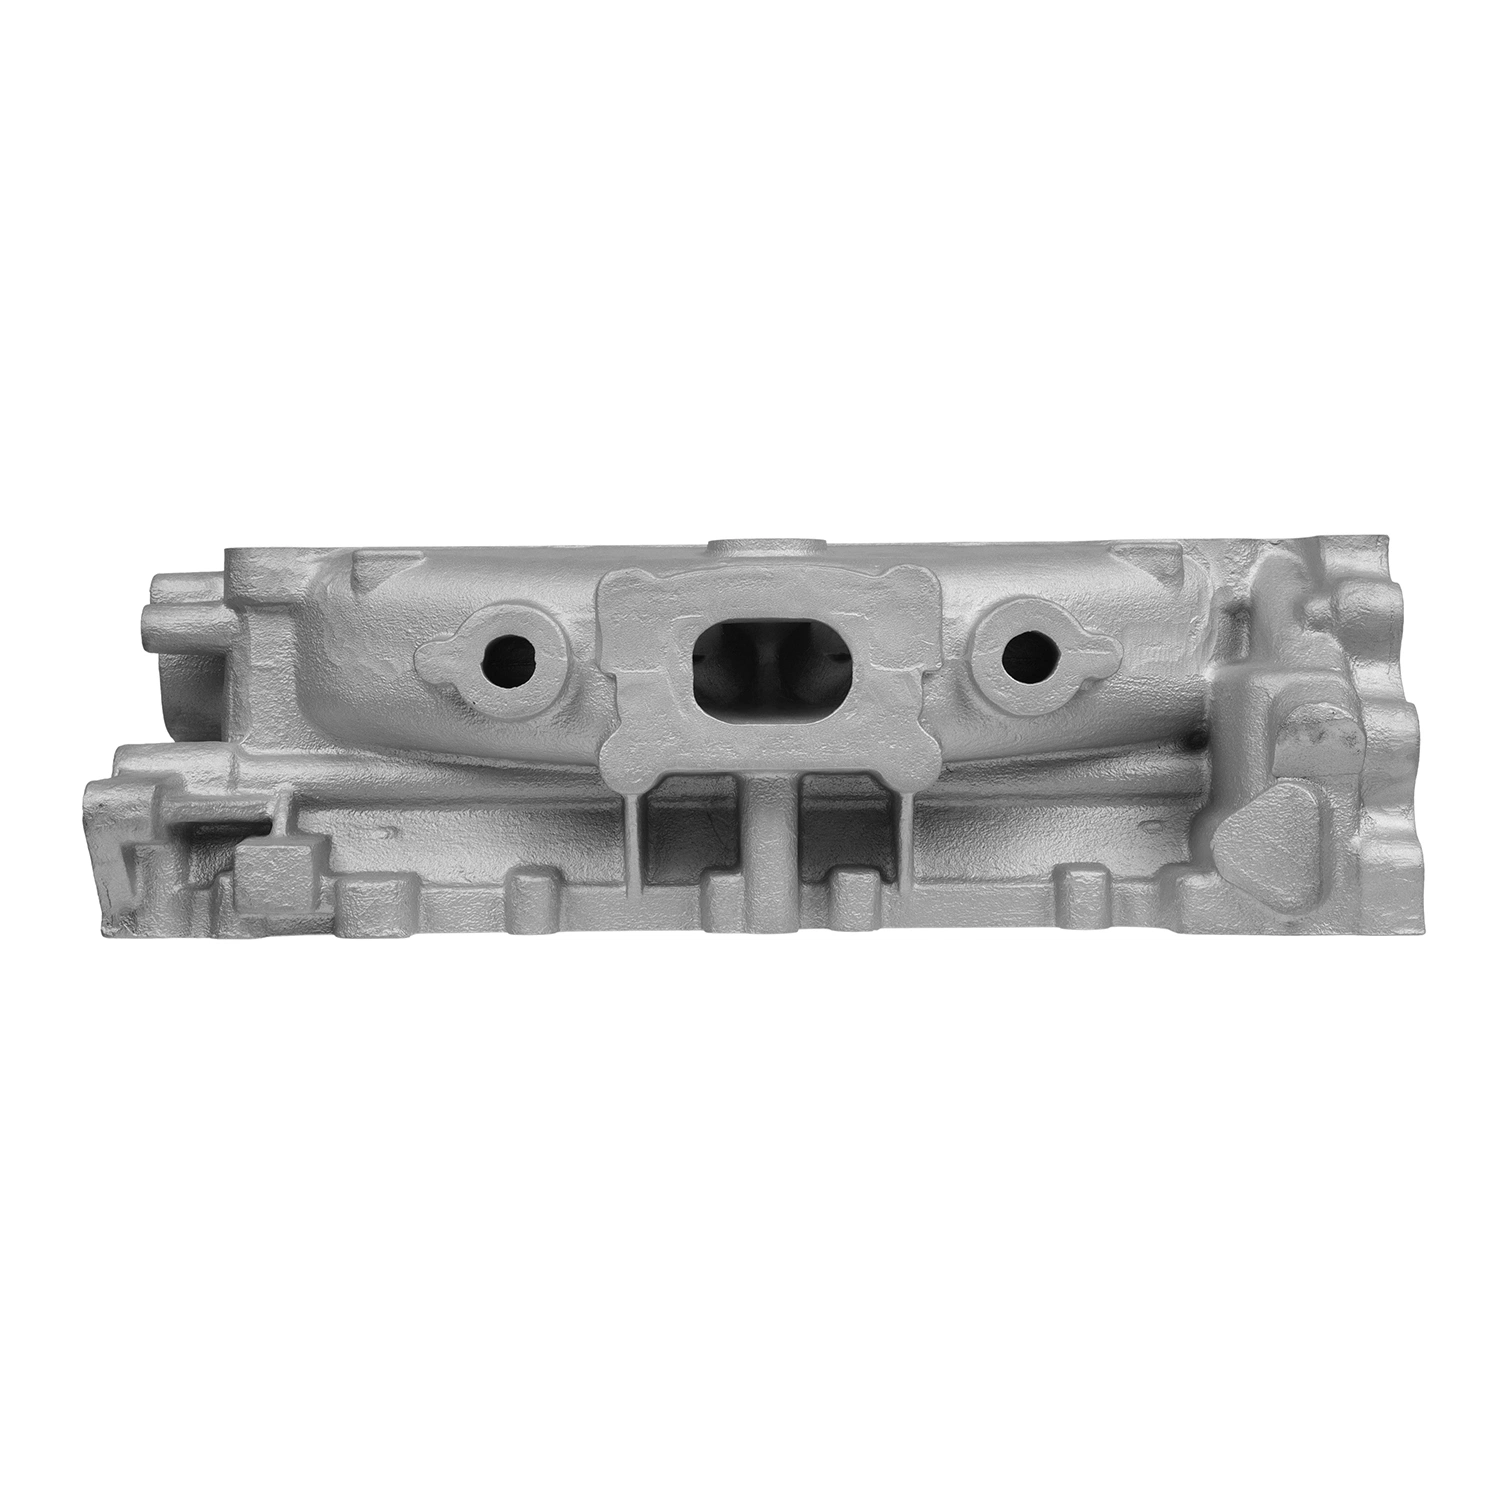 Cast Iron Bearing Housing OEM Customized 3D Printing Sand Casting Aluminum Engine and Iron Stainless Steel Part